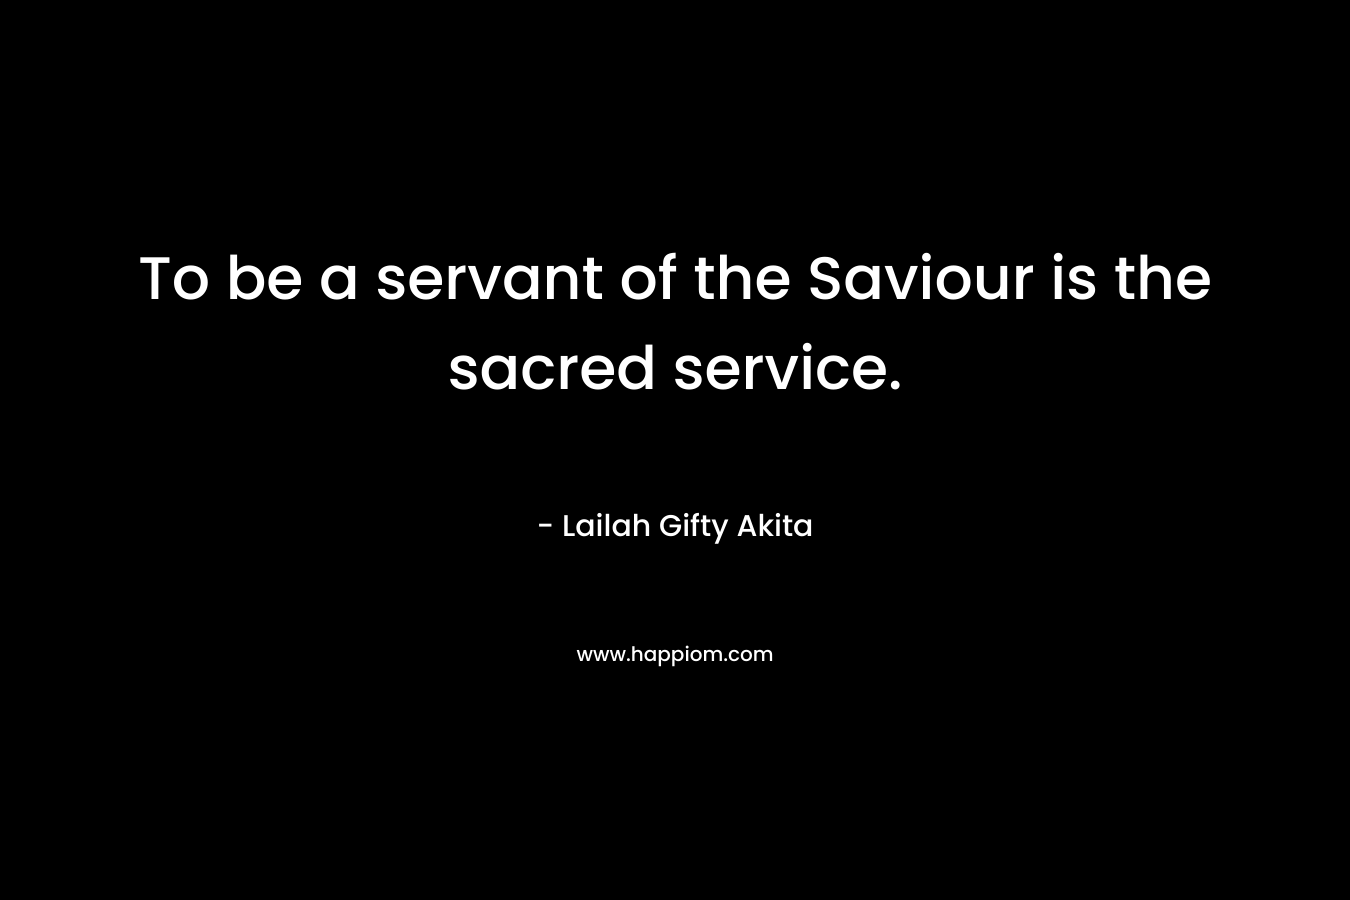 To be a servant of the Saviour is the sacred service.